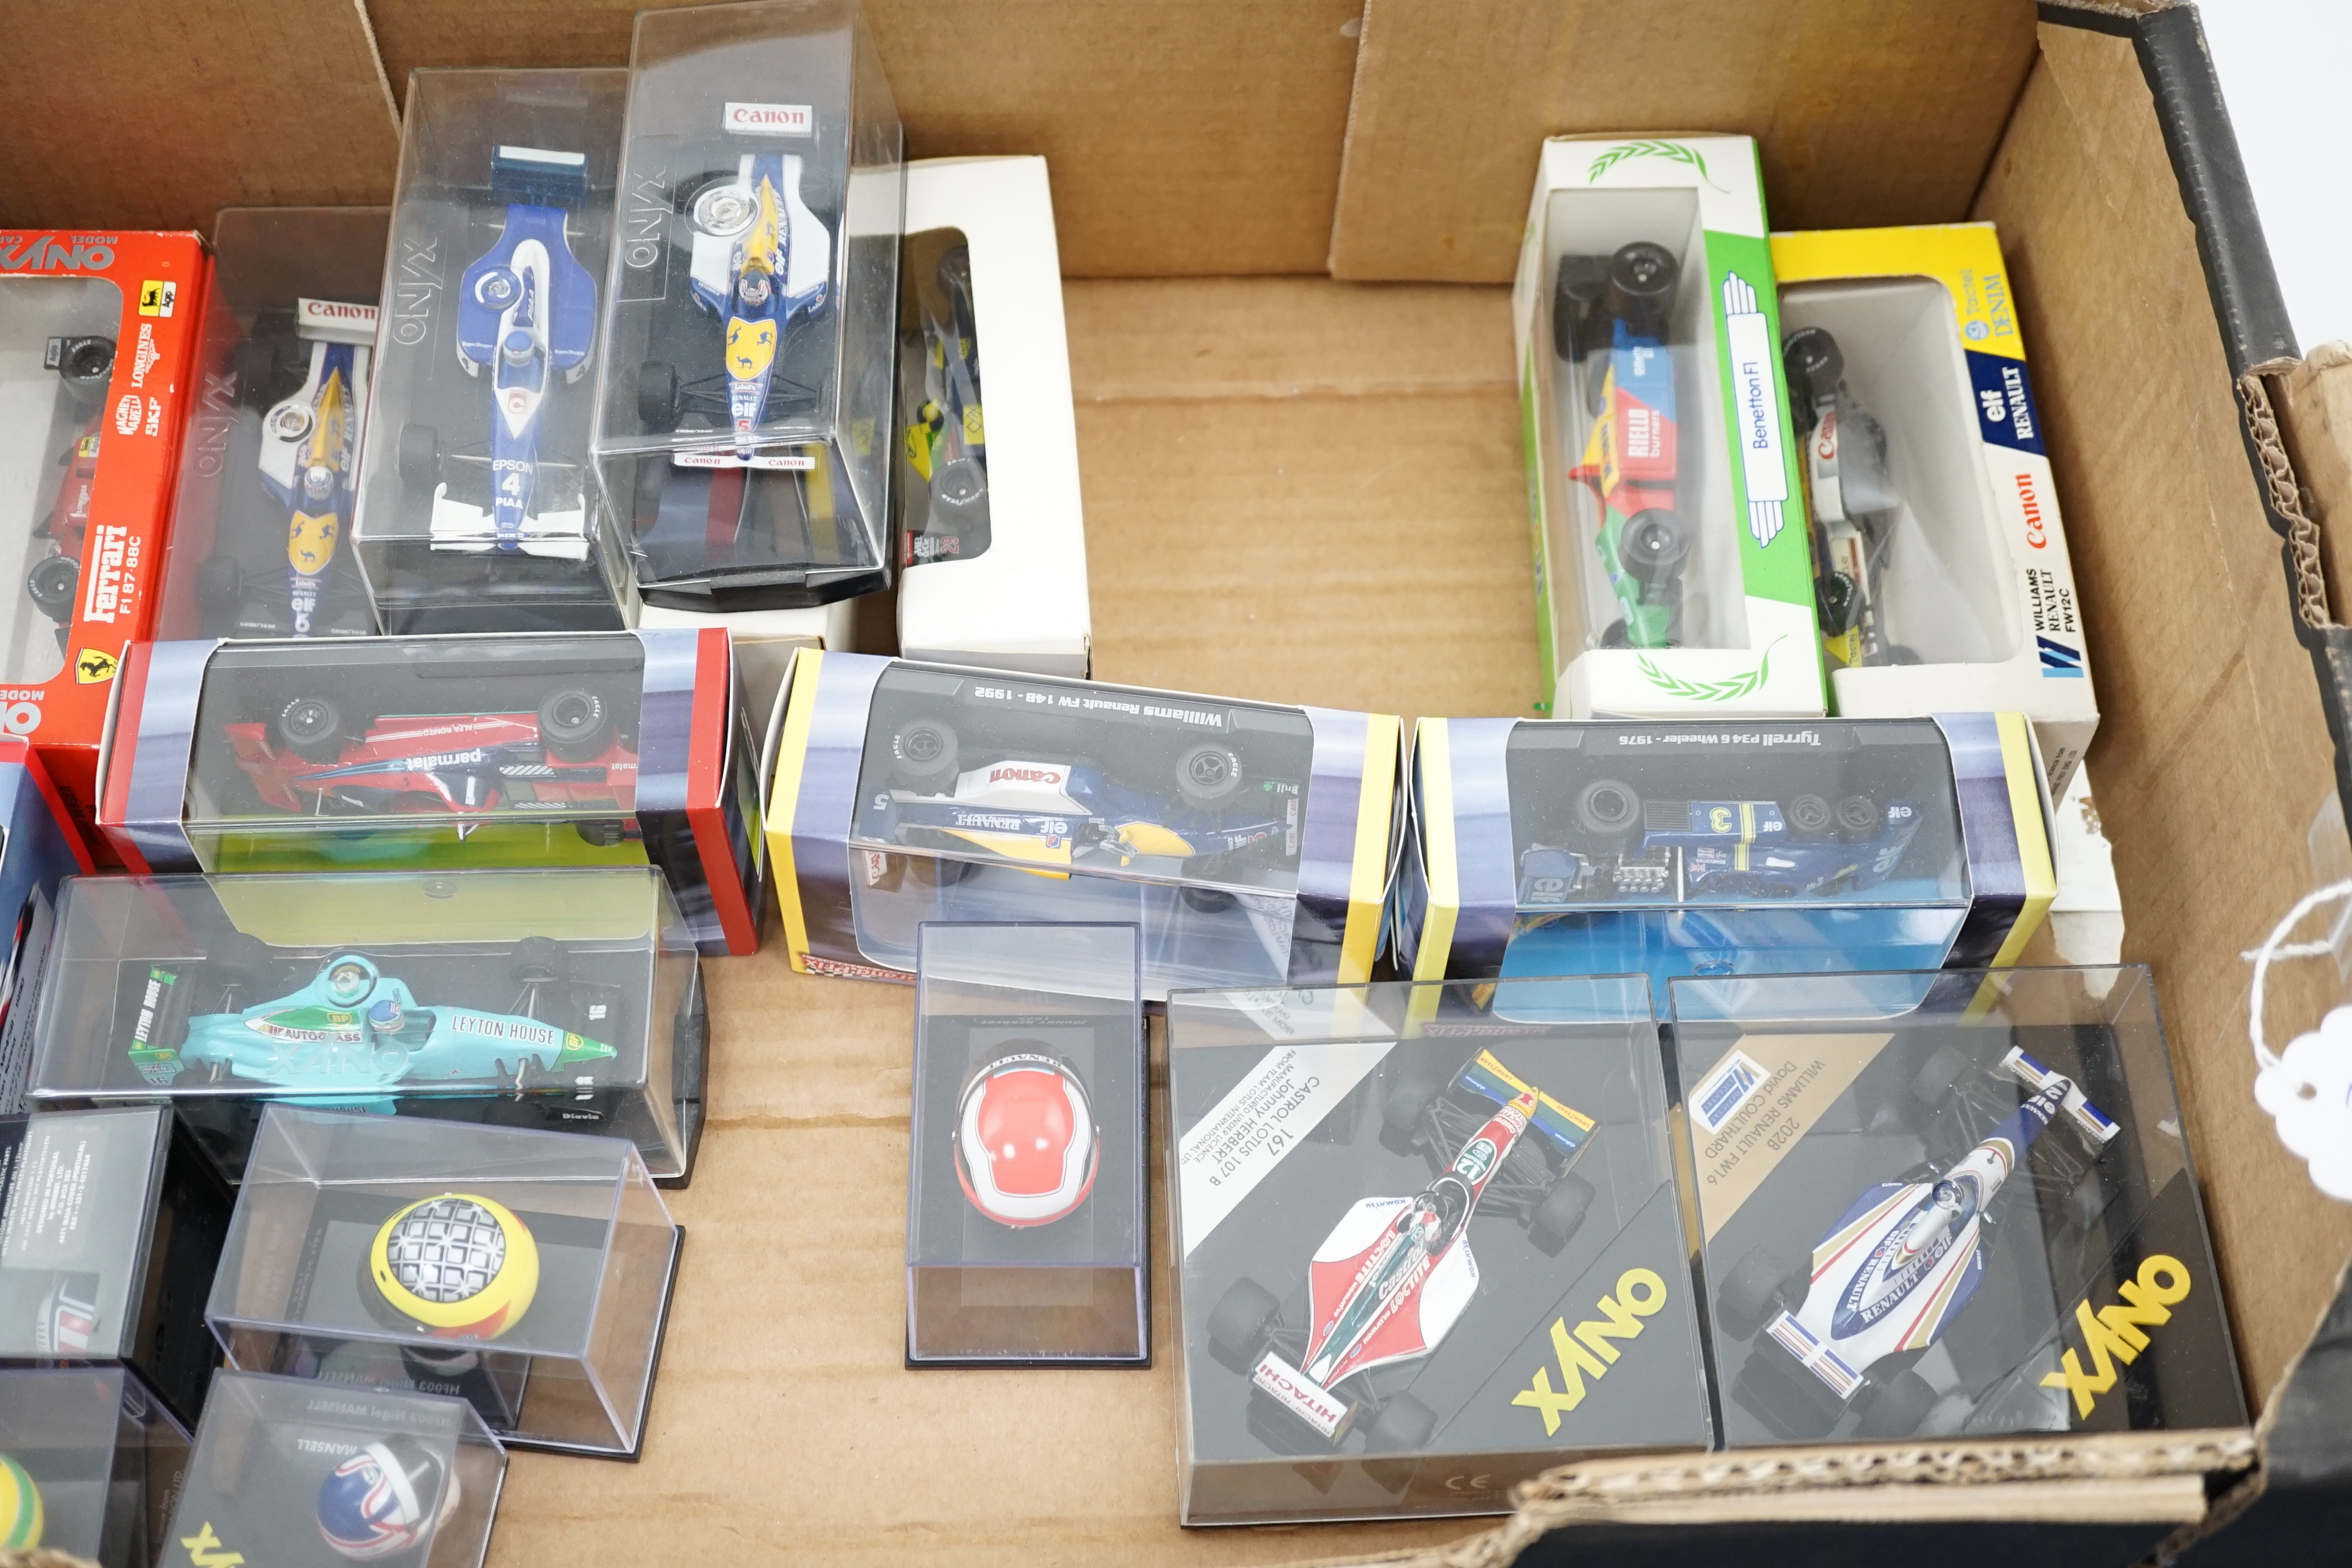 Thirty-seven boxed diecast motor racing related models by Onyx, Atlas Editions, etc. including 1:43 scale Formula One racing cars, models of helmets of famous drivers, etc.